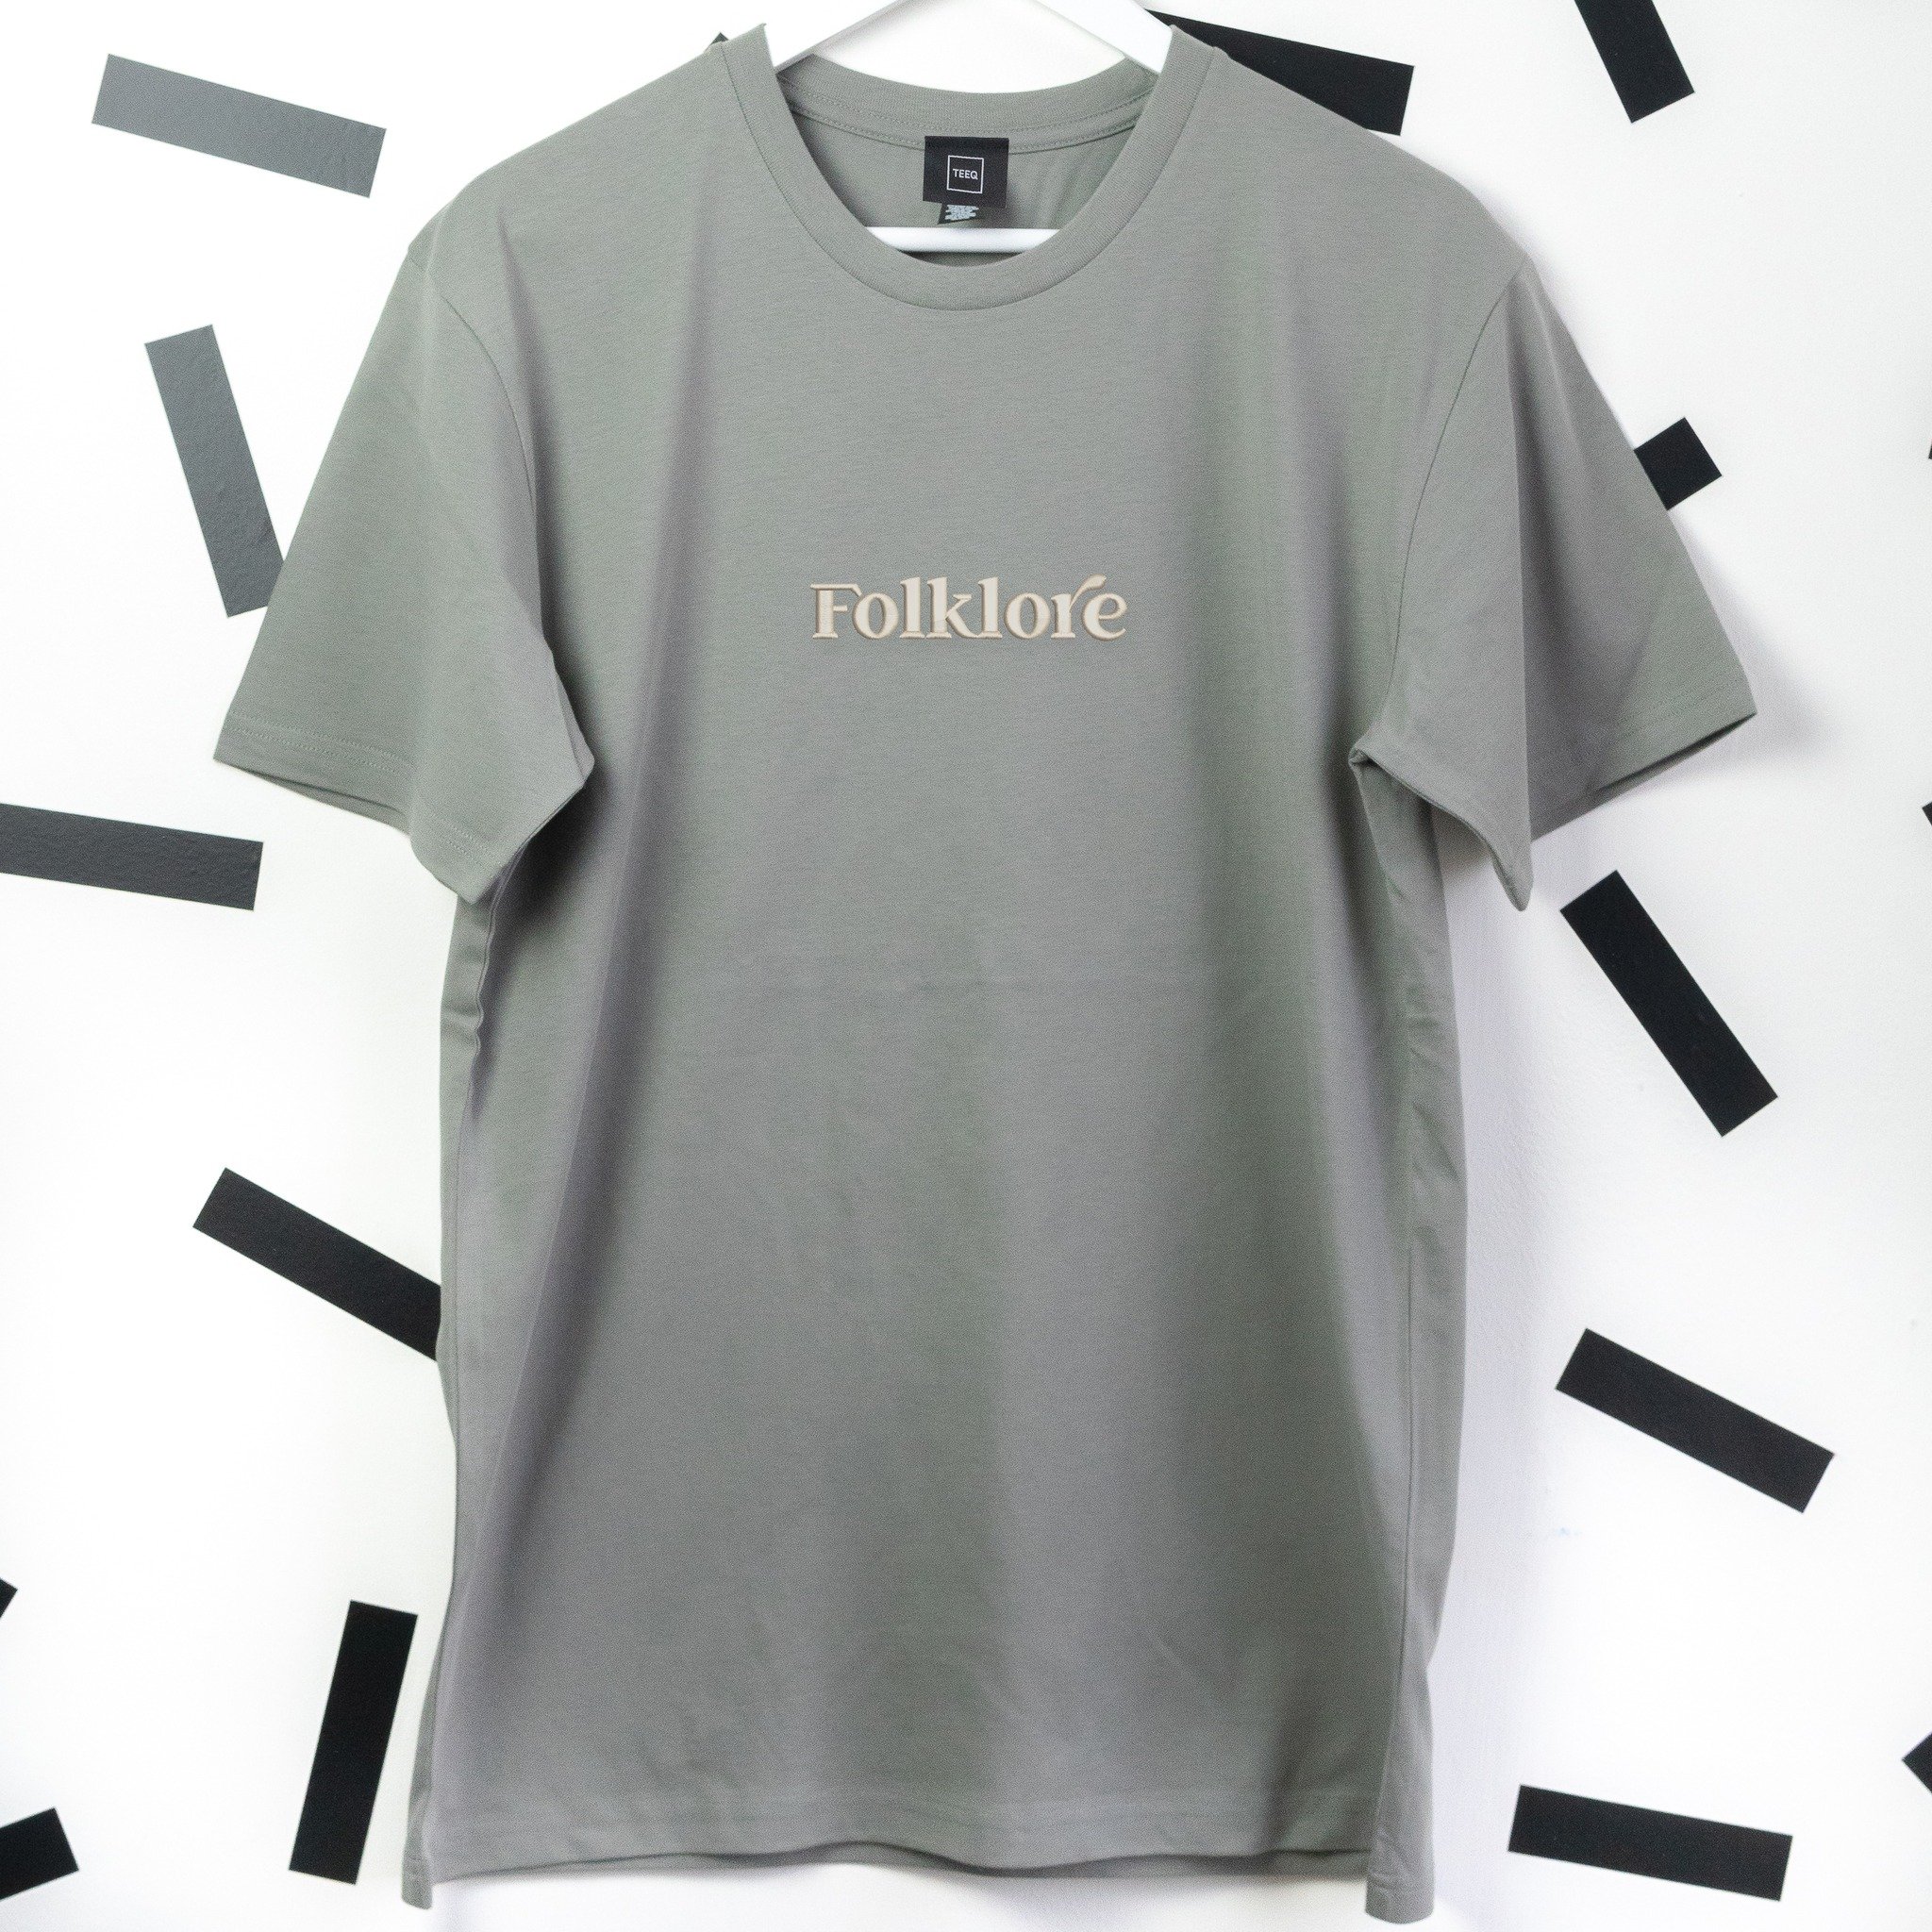 Are you a Folklore album lover? 🌿💫

Our Taylor Swift folklore inspired t-shirt, a tribute to the enchanting world of her critically acclaimed album. The faded grey tee features embroidered front text seamlessly merging into the color of the fabric,